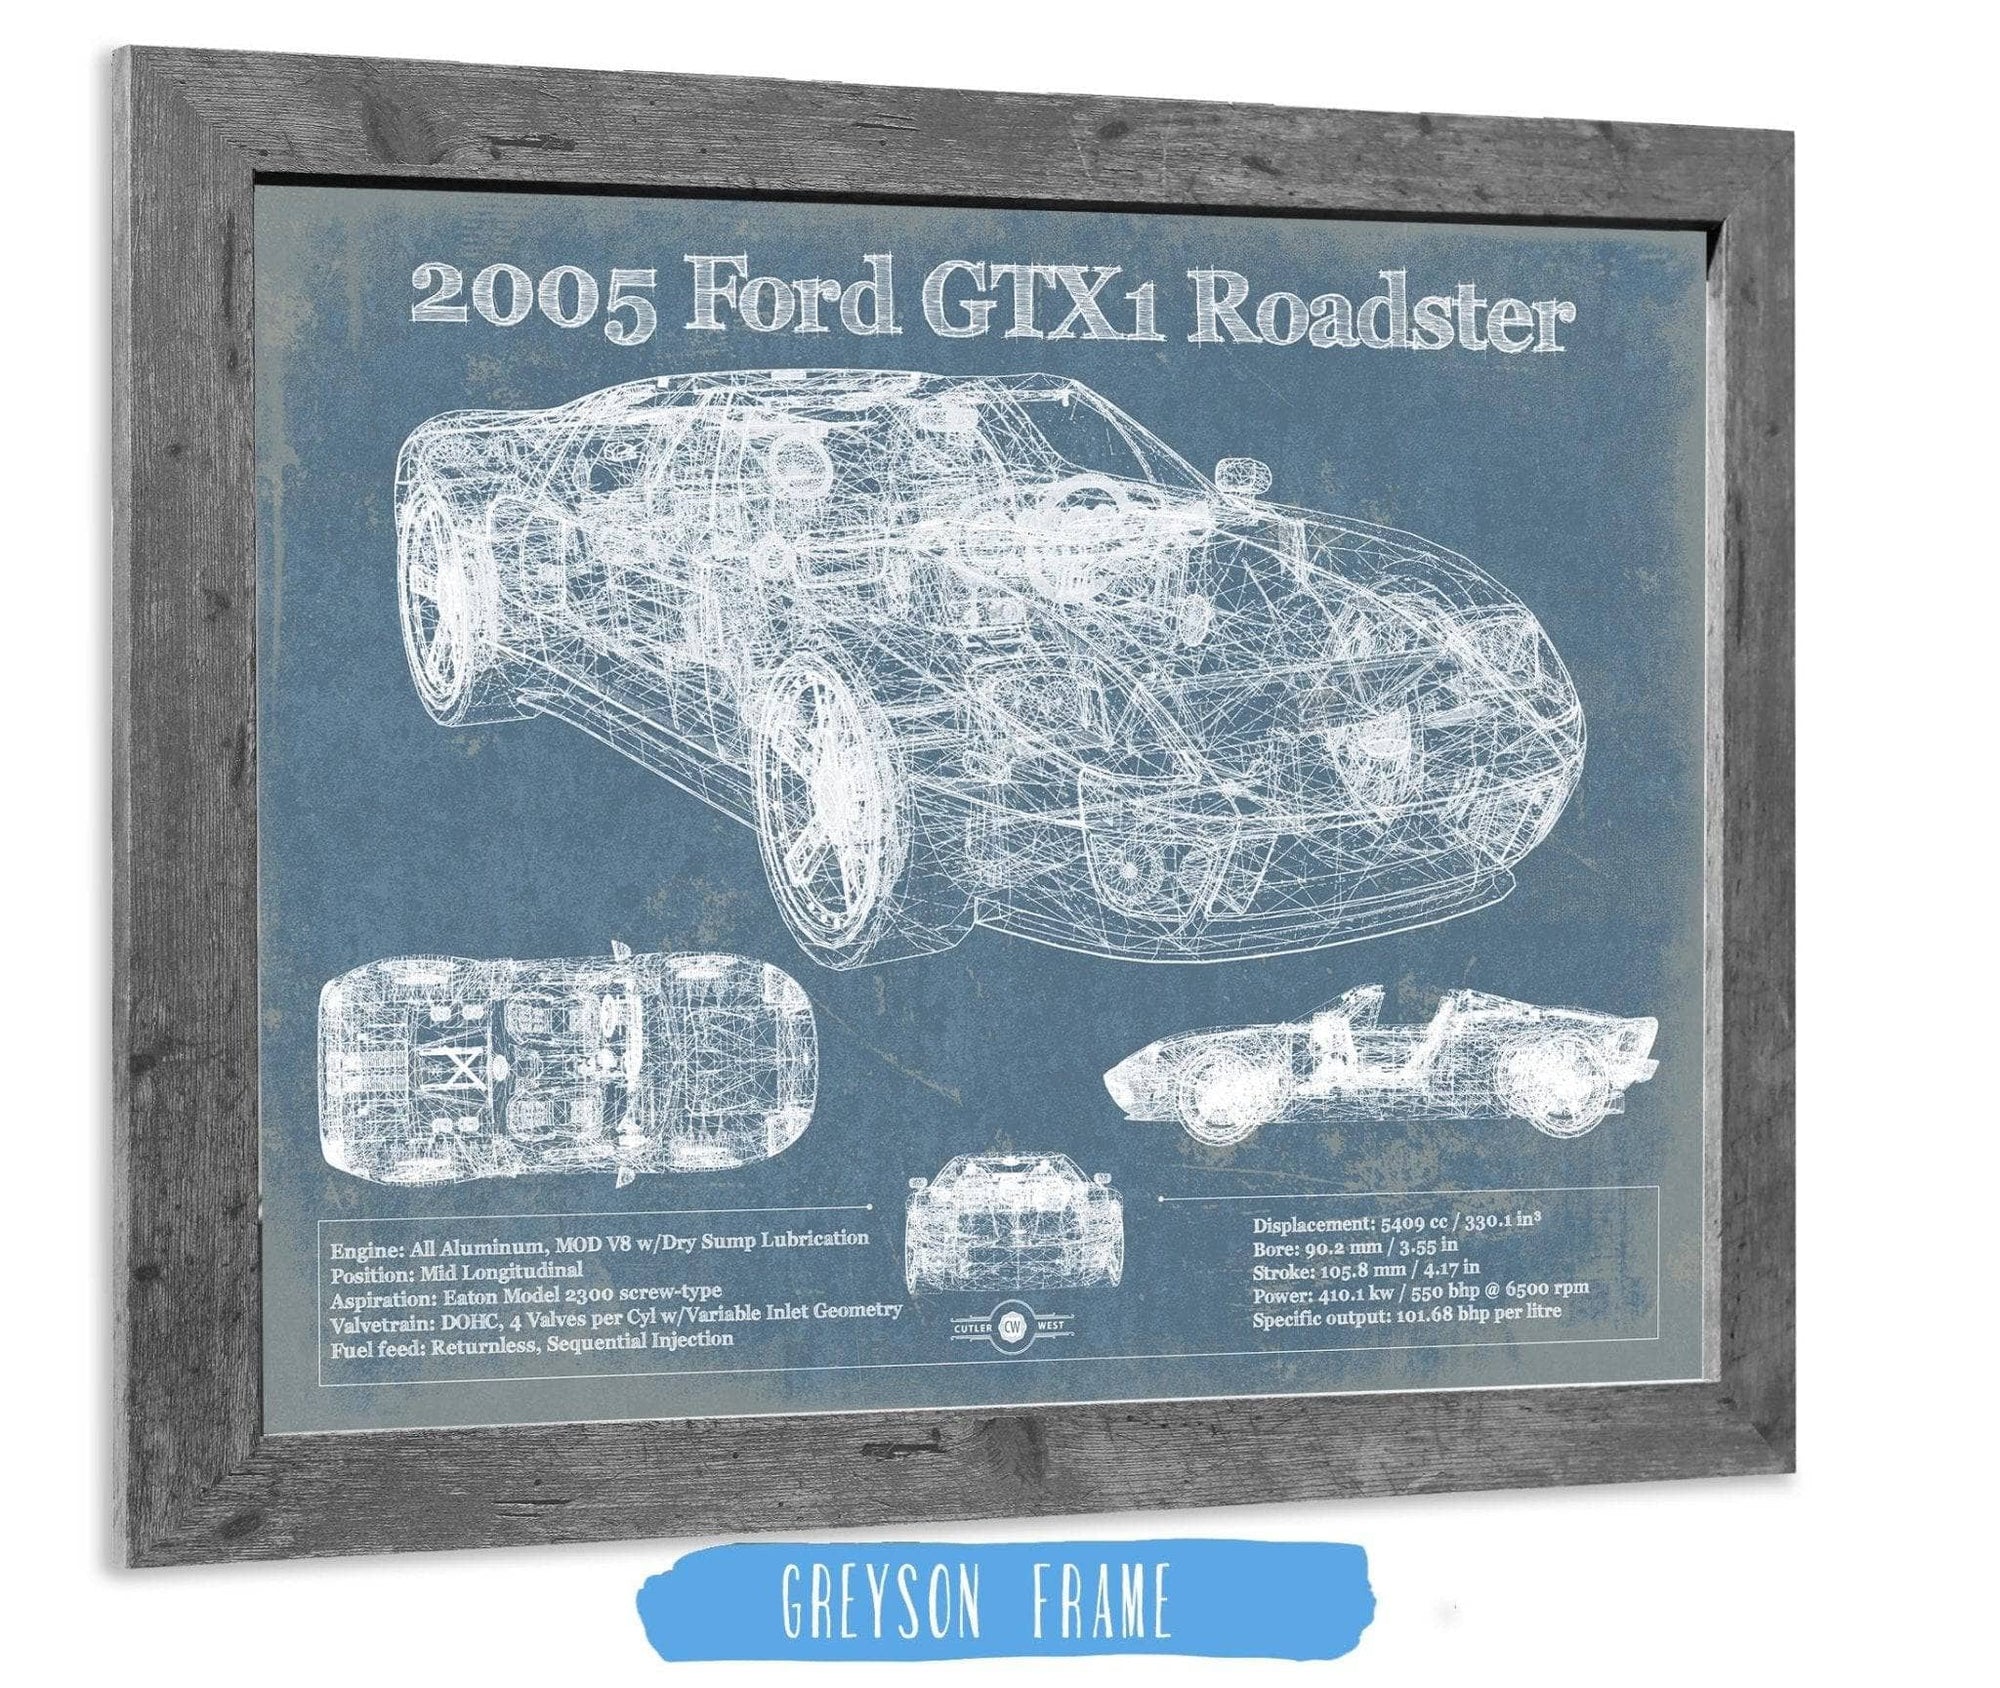 Cutler West Ford Collection 14" x 11" / Greyson Frame 2005 Ford GTX1 Roadster Vintage Blueprint Auto Print 933350037_17741